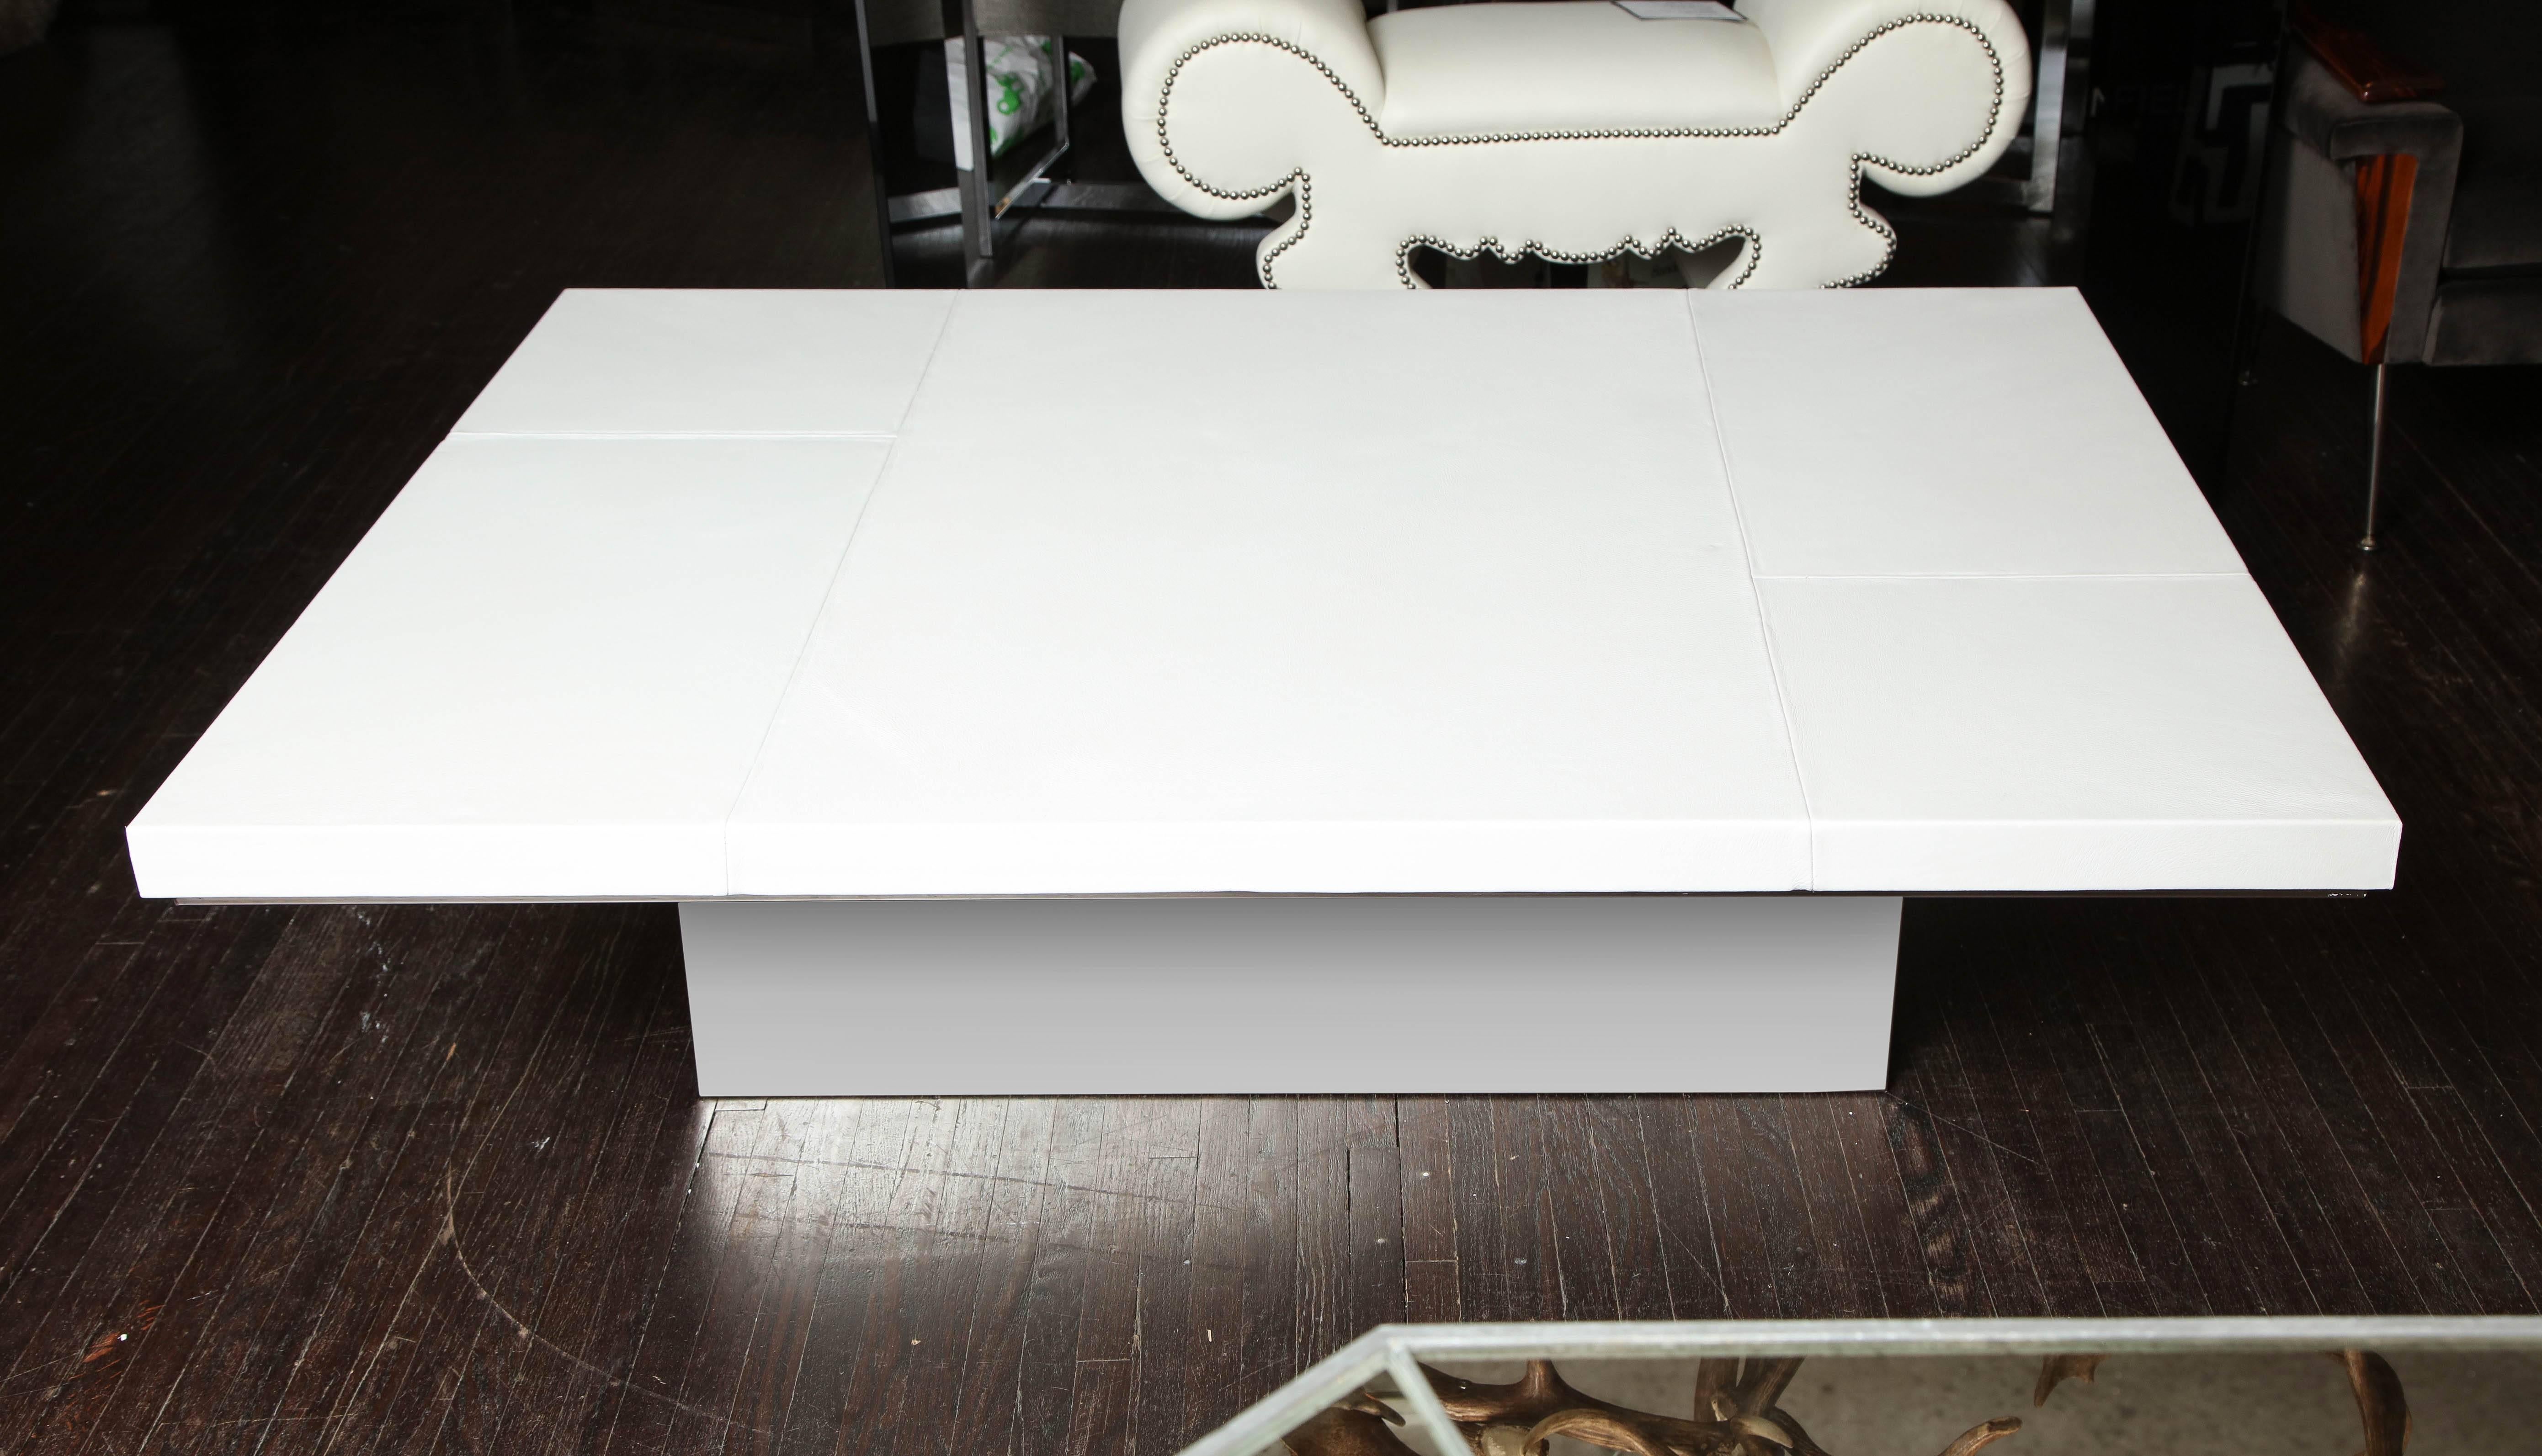 Chic white leather cocktail table with stitching detail on a mirrored stainless steel base.